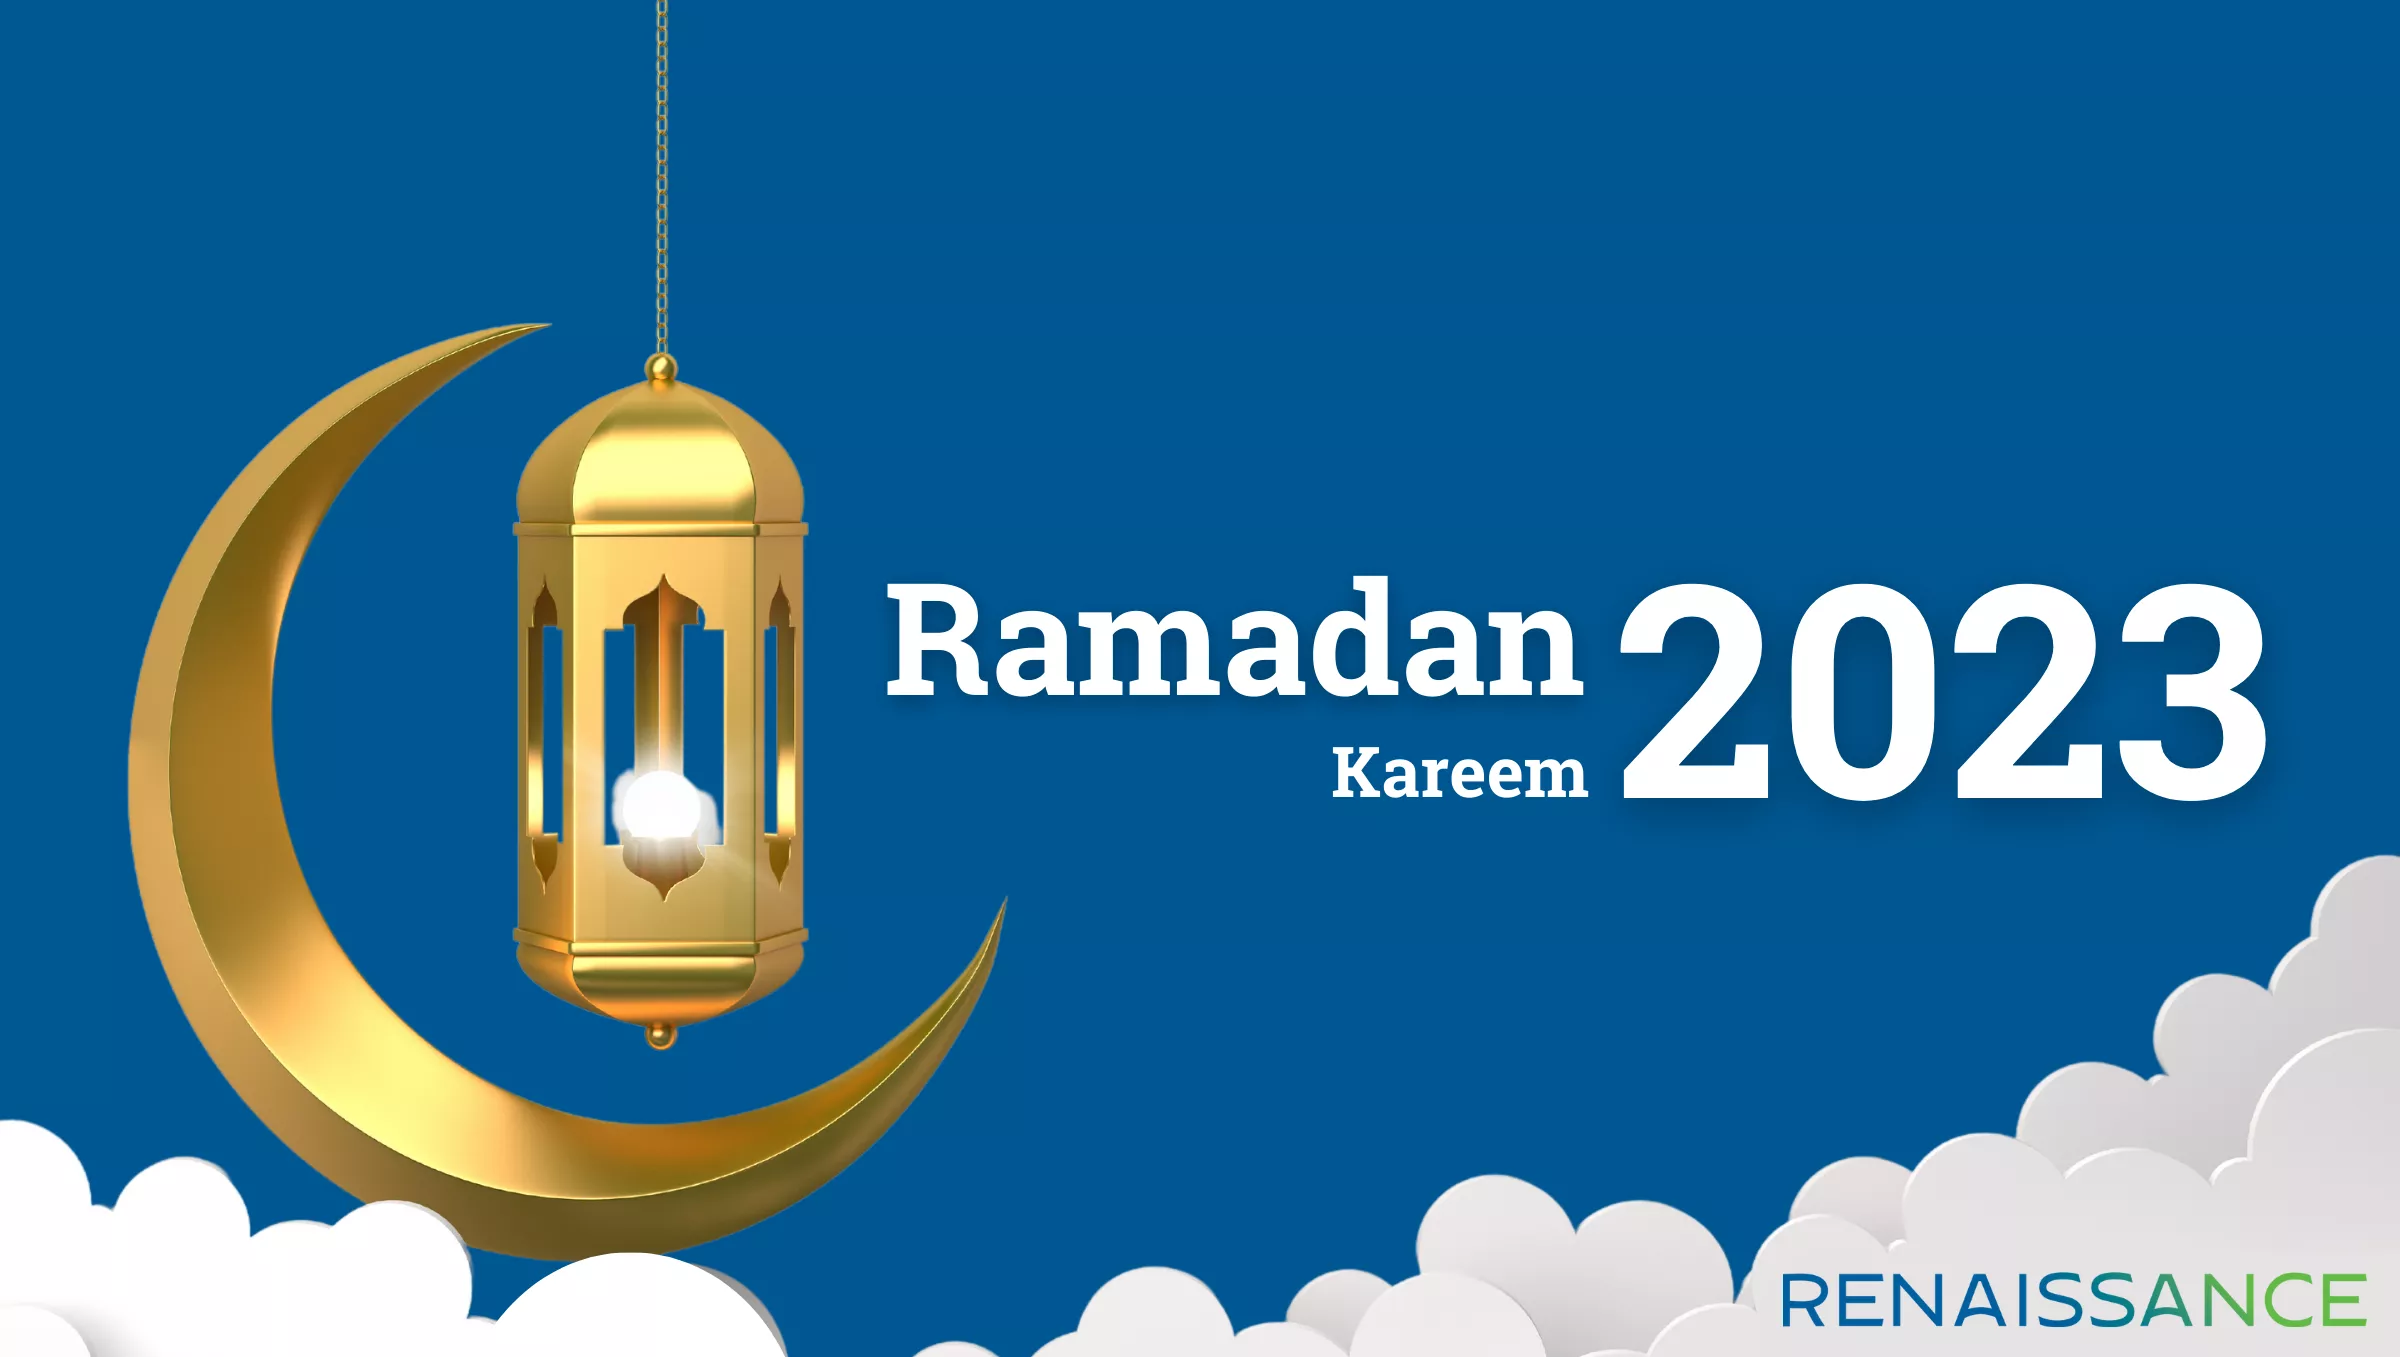 Hero image for the Ramadan offer page